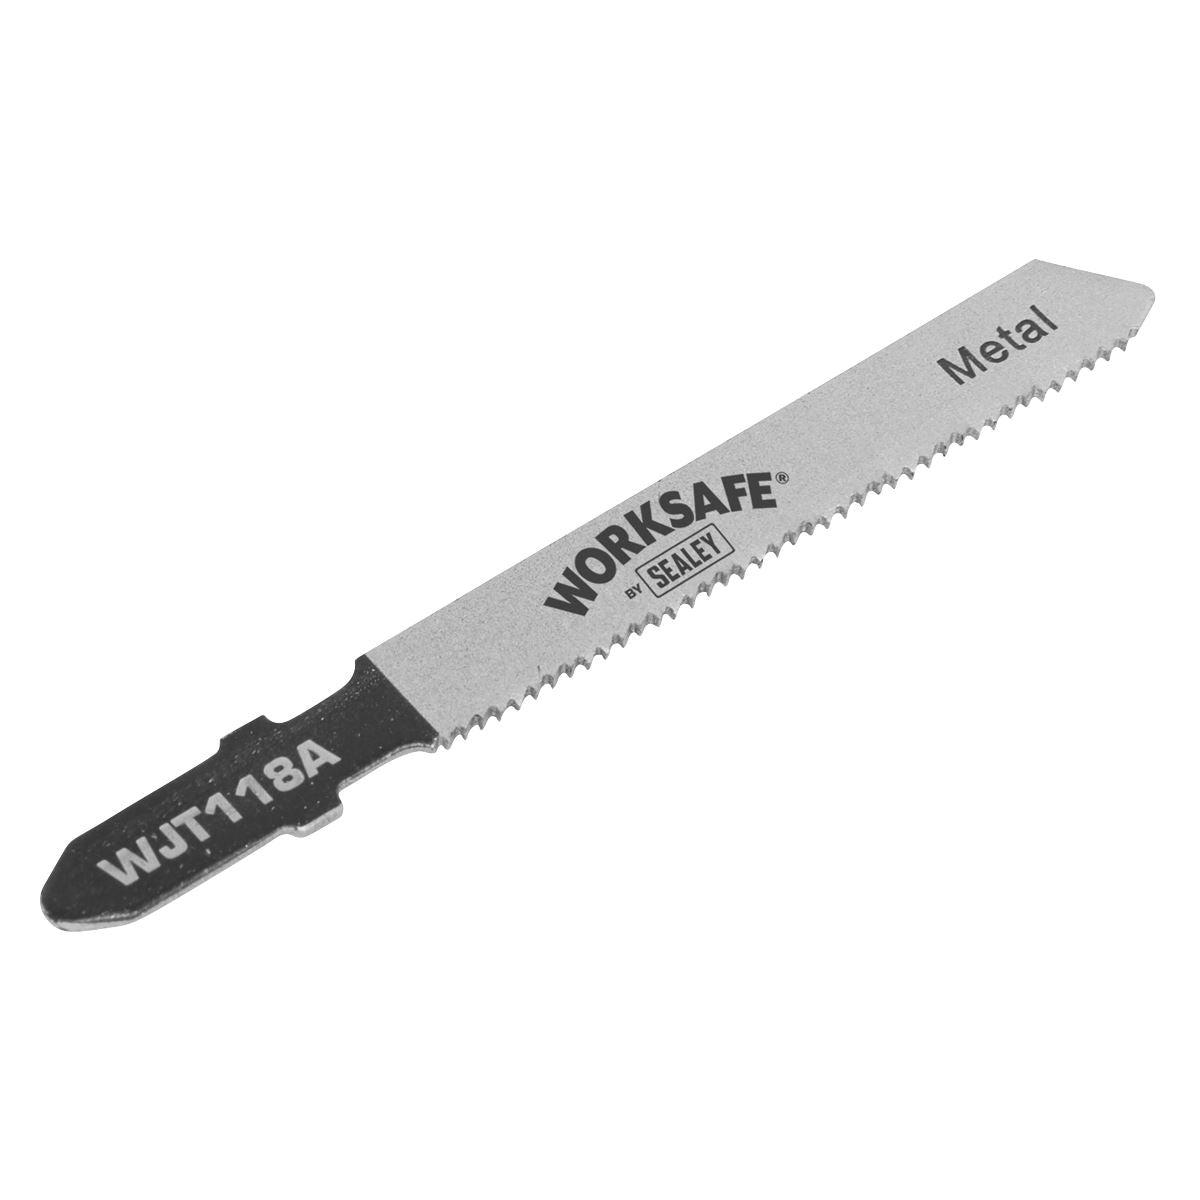 Sealey Jigsaw Blade Metal 55mm 21tpi - Pack of 5